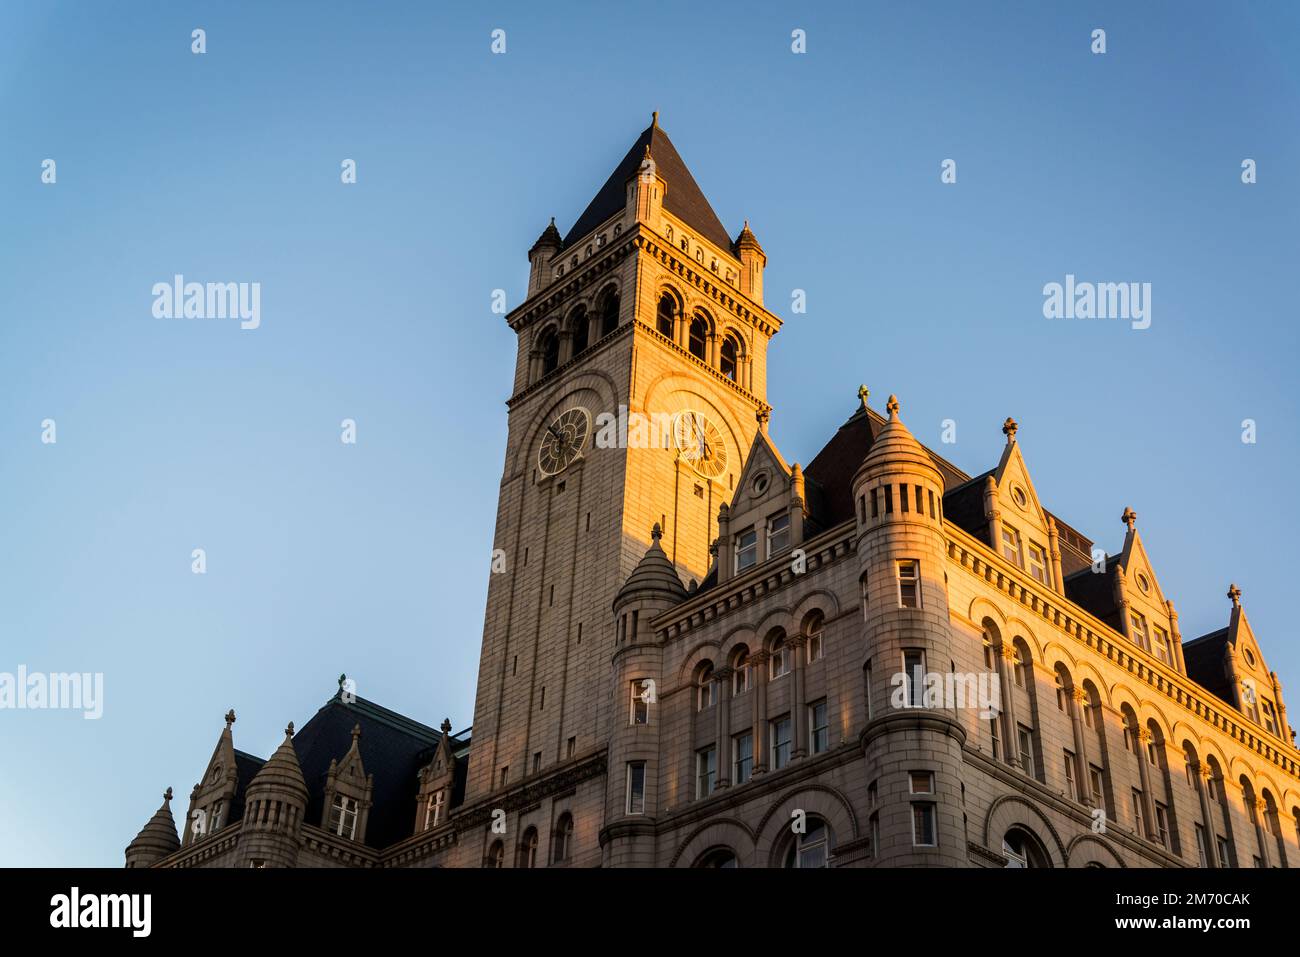 Old Post Office Pavilion, 19th-century former post office building turned high-end lodging, with dining & a spa., Washington, D.C., USA Stock Photo